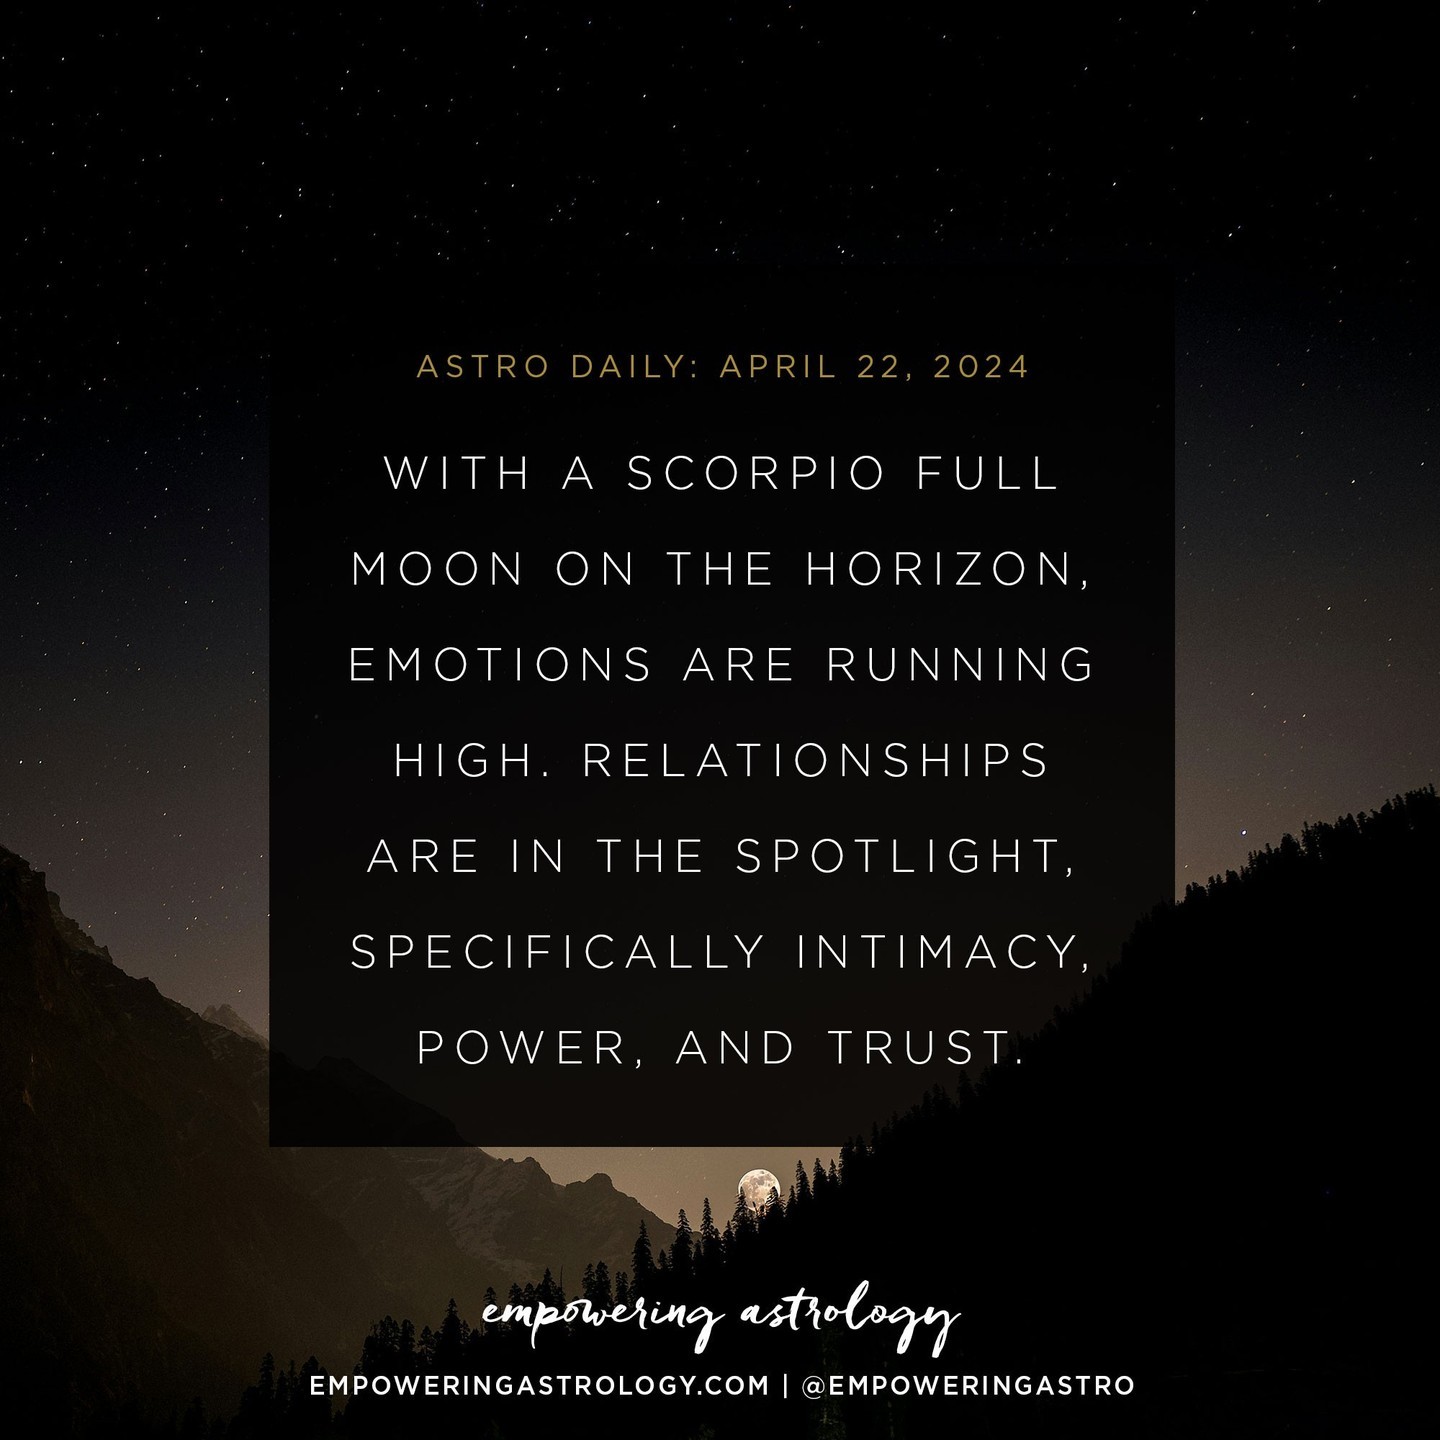 Astro Daily May 1, 2024 Empowering Astrology